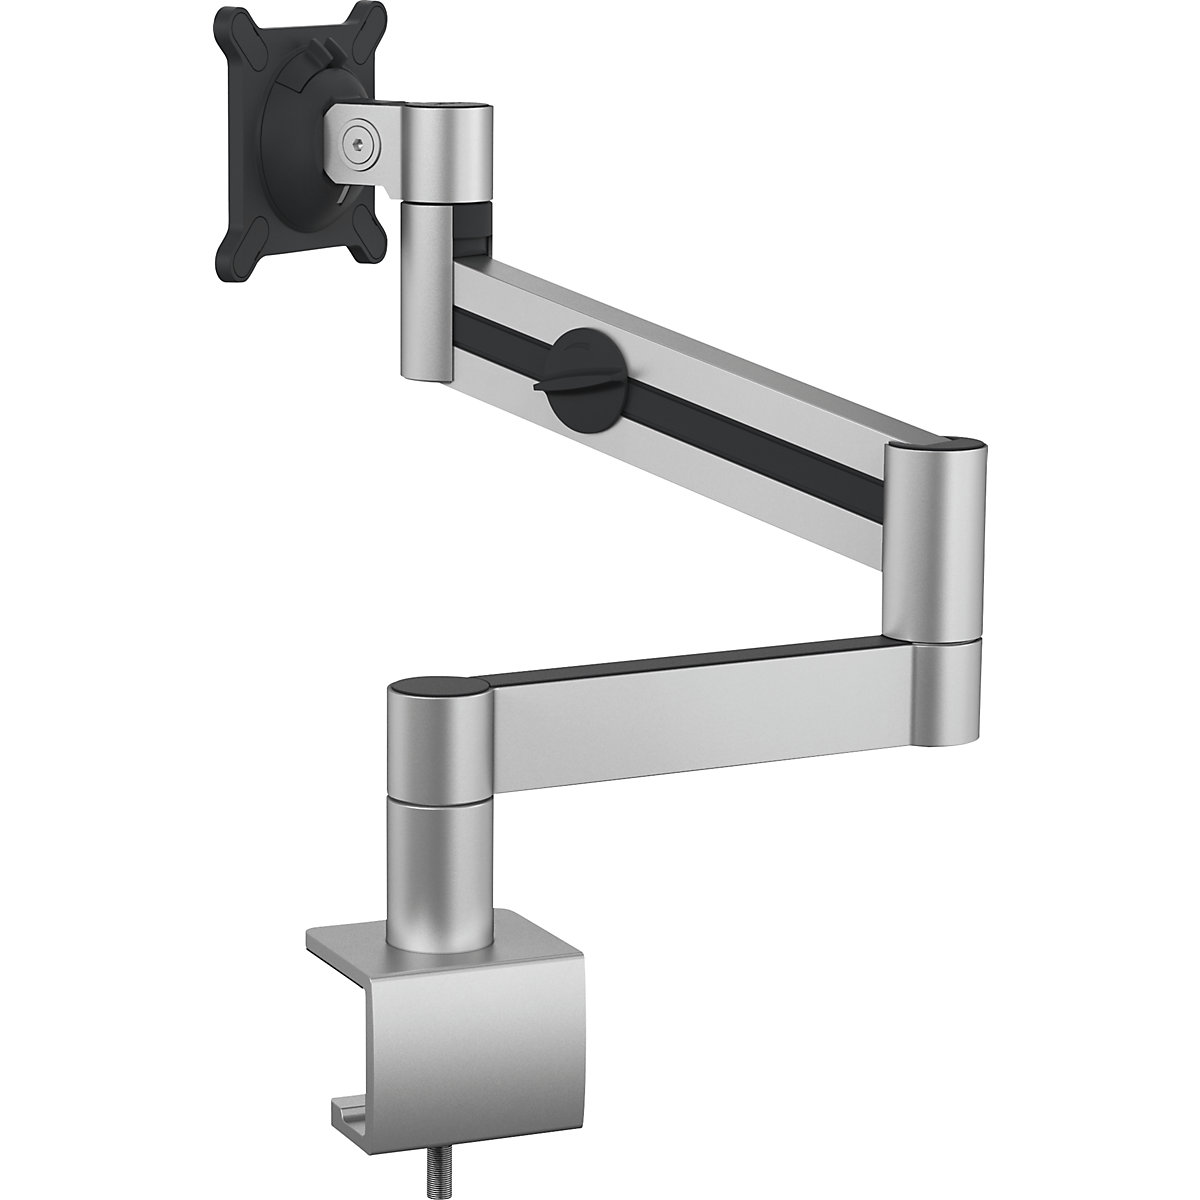 Monitor holder with arm for 1 monitor - DURABLE